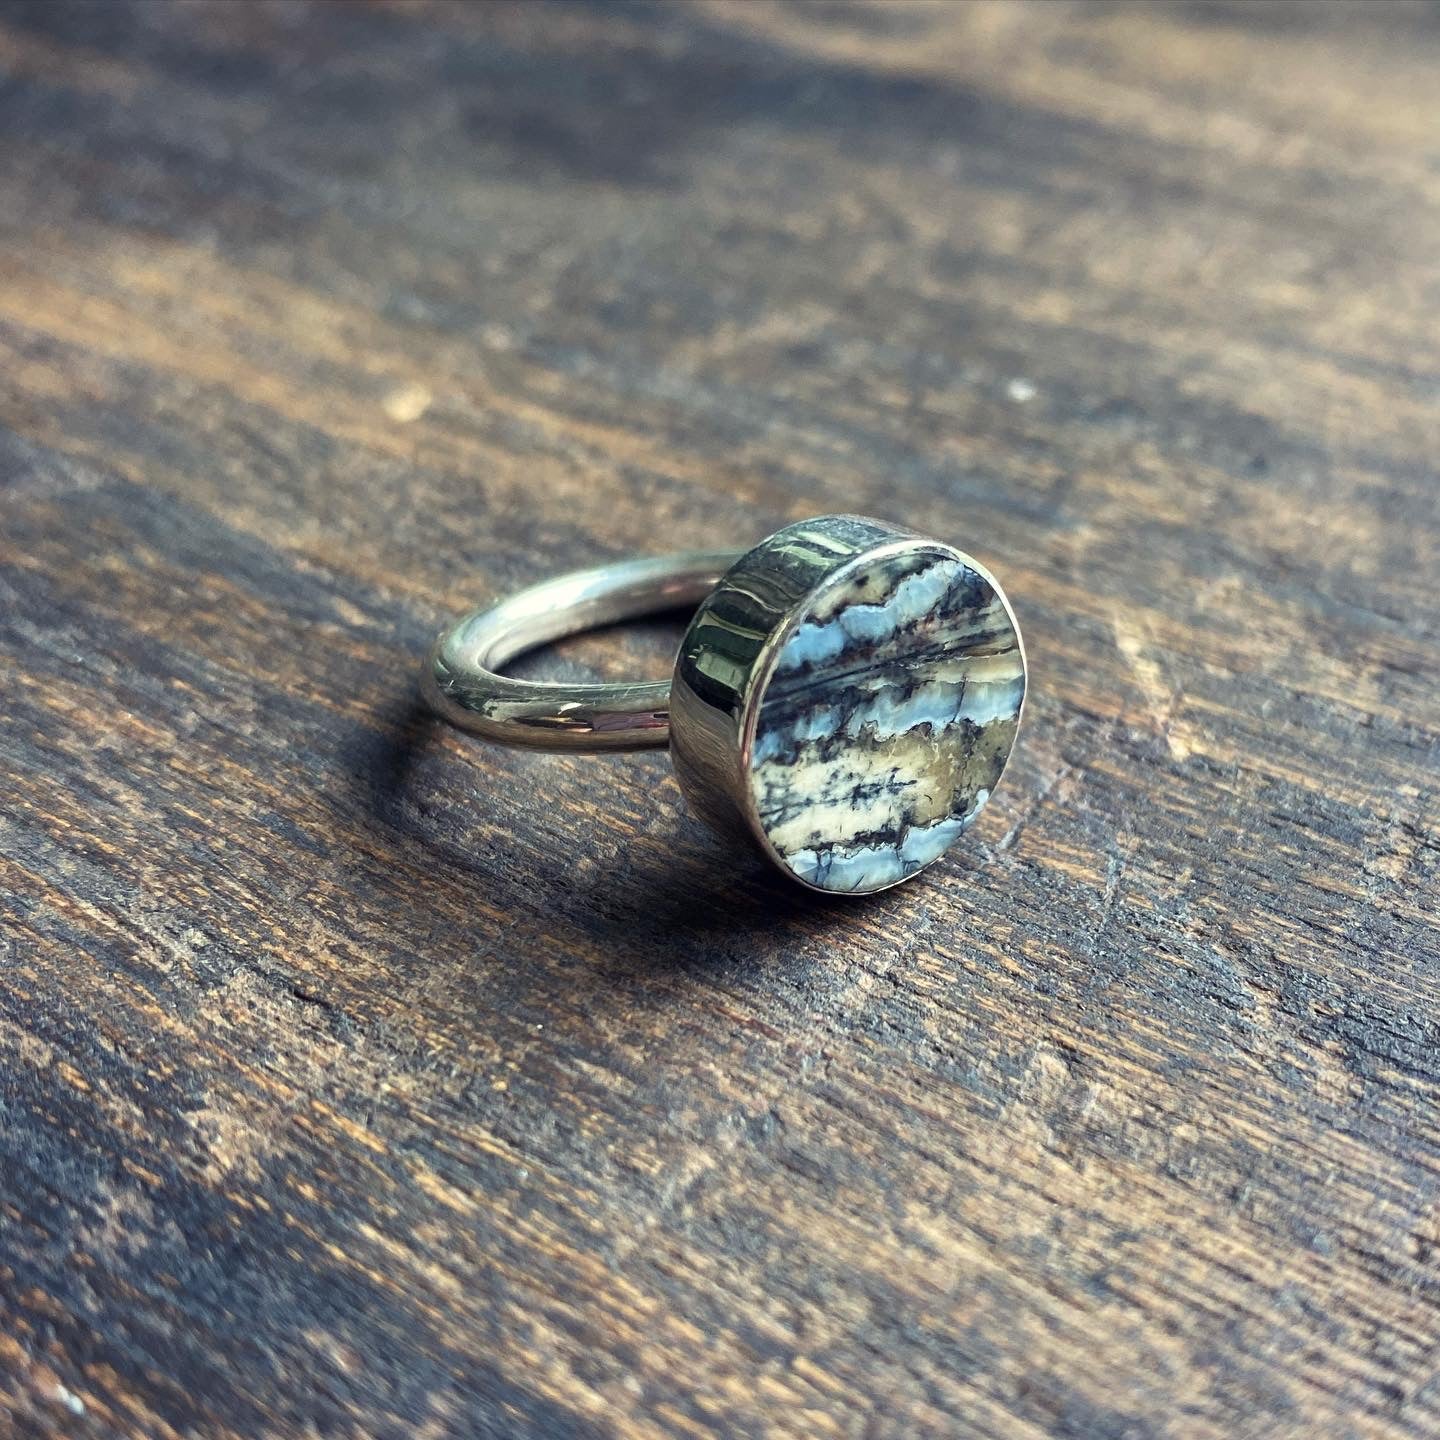 Mammoth Tooth Round Ring